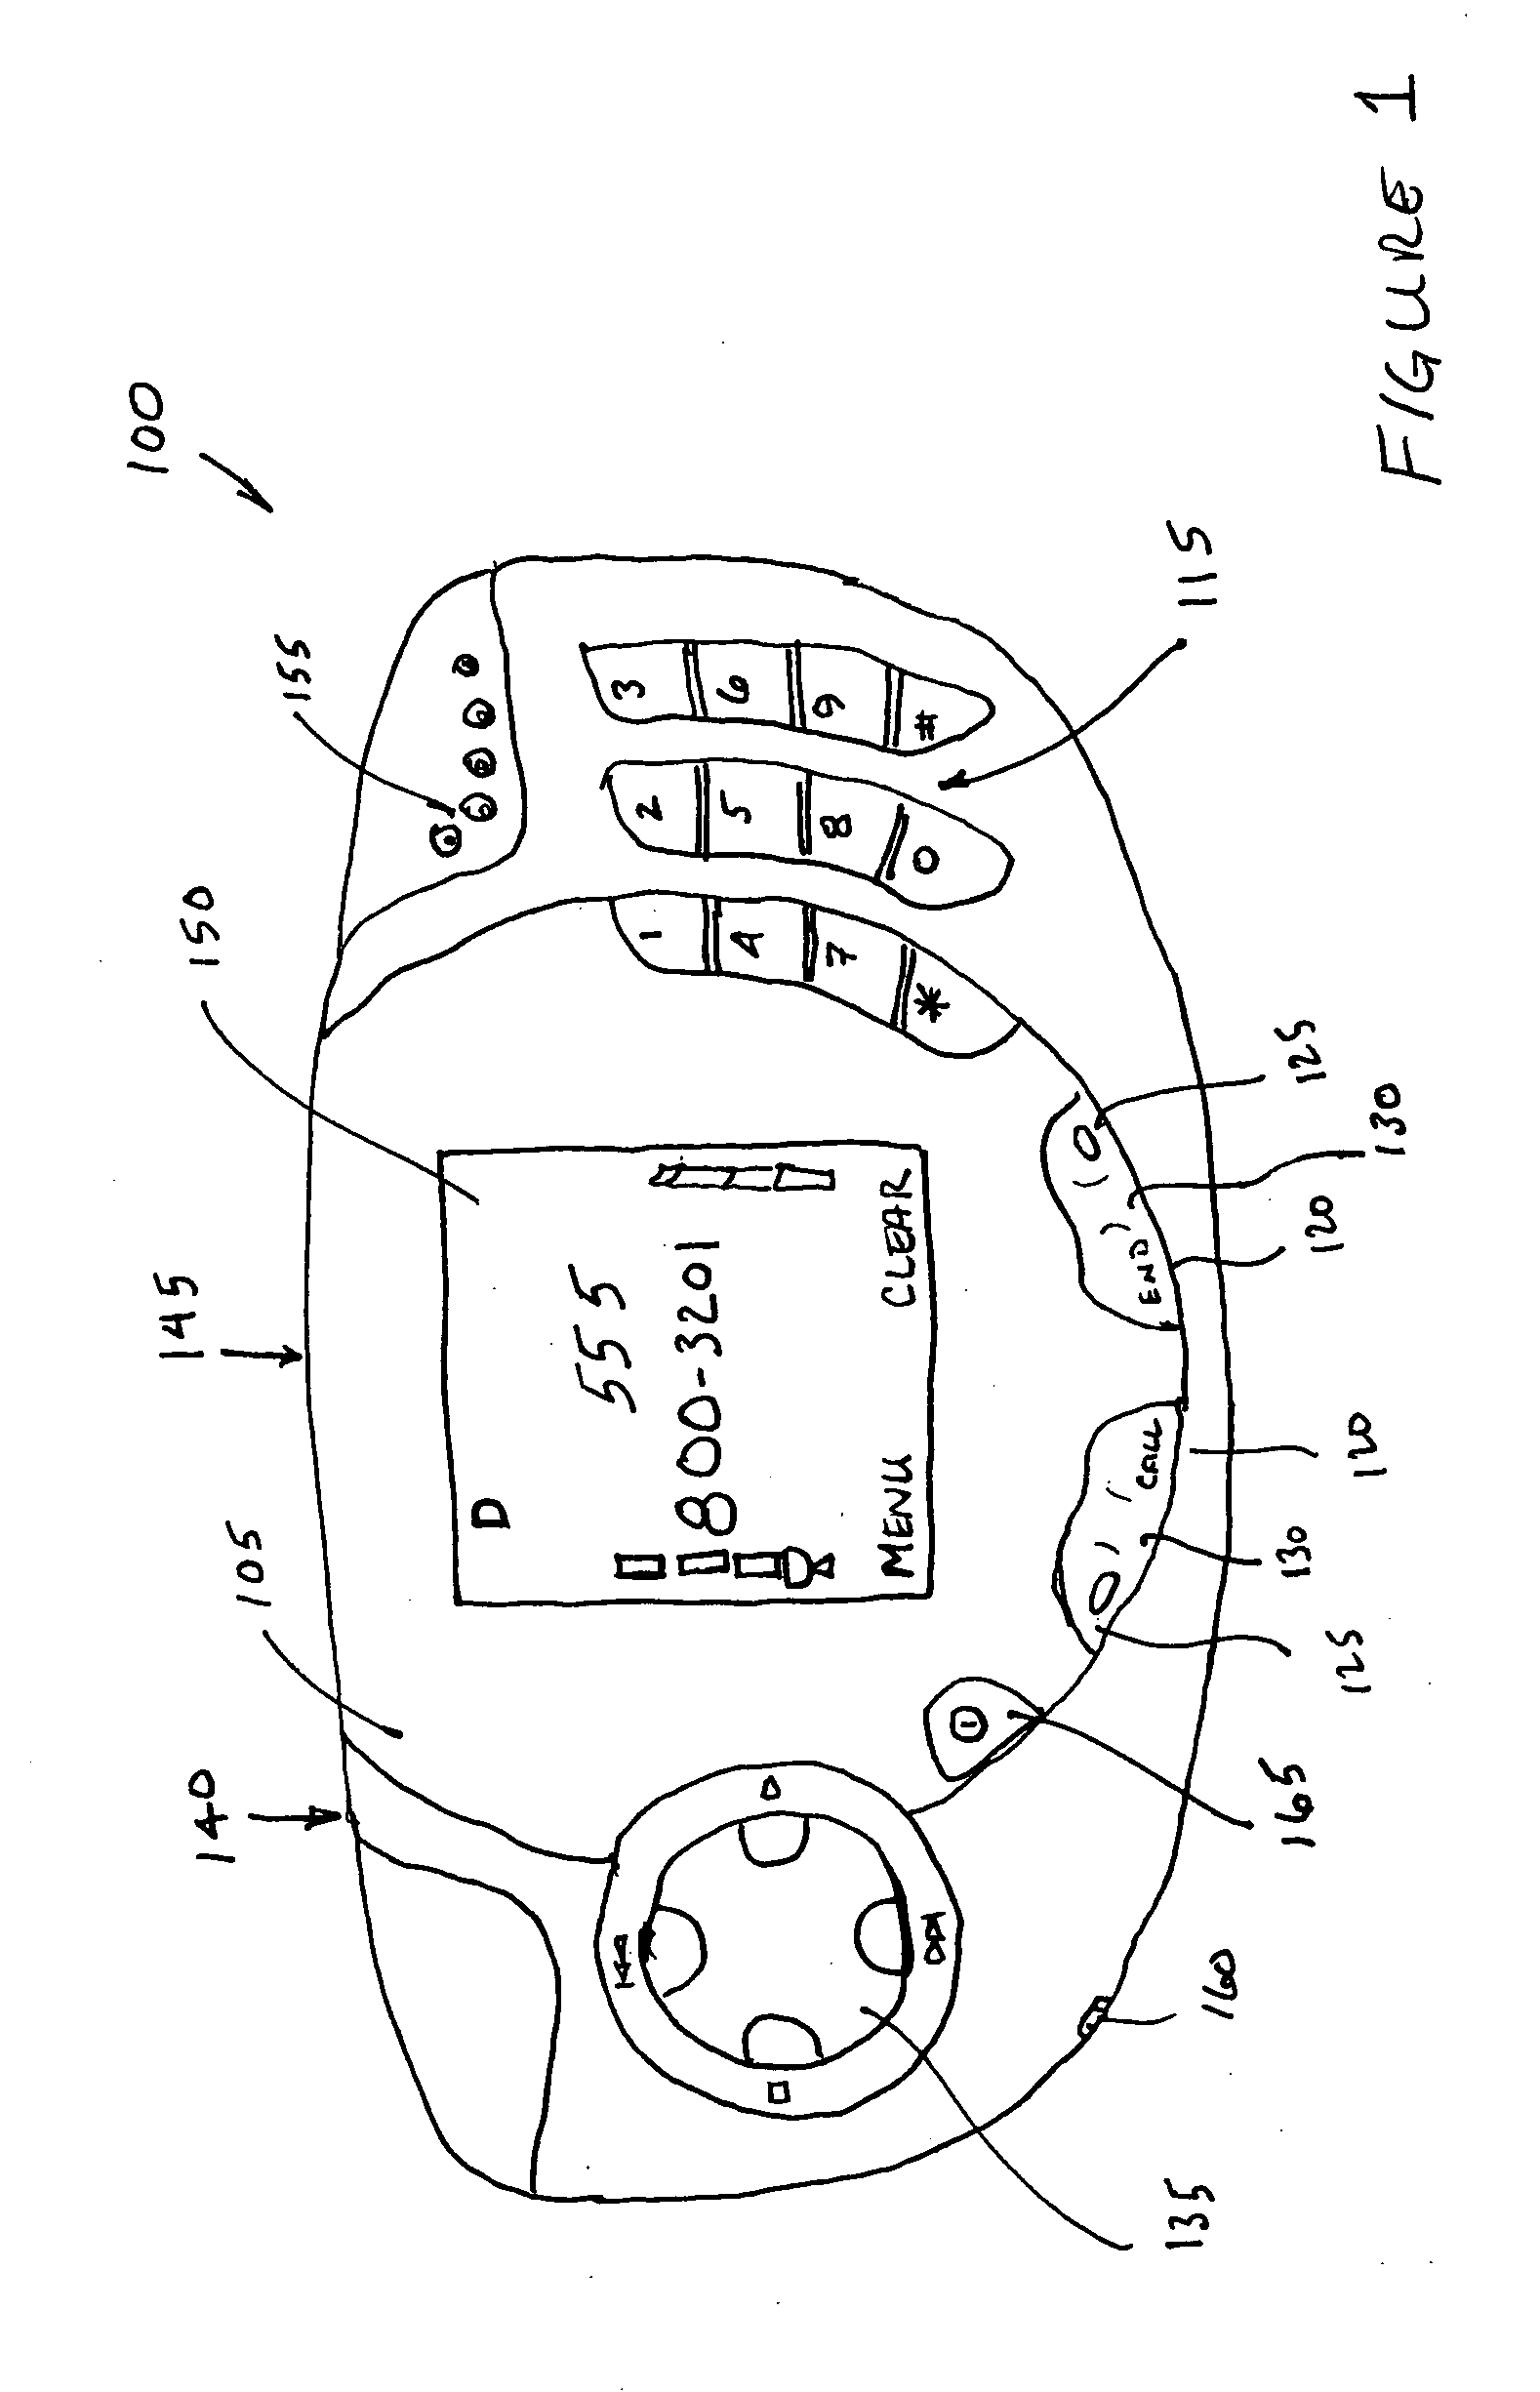 Mobile telephone with enhanced display visualization